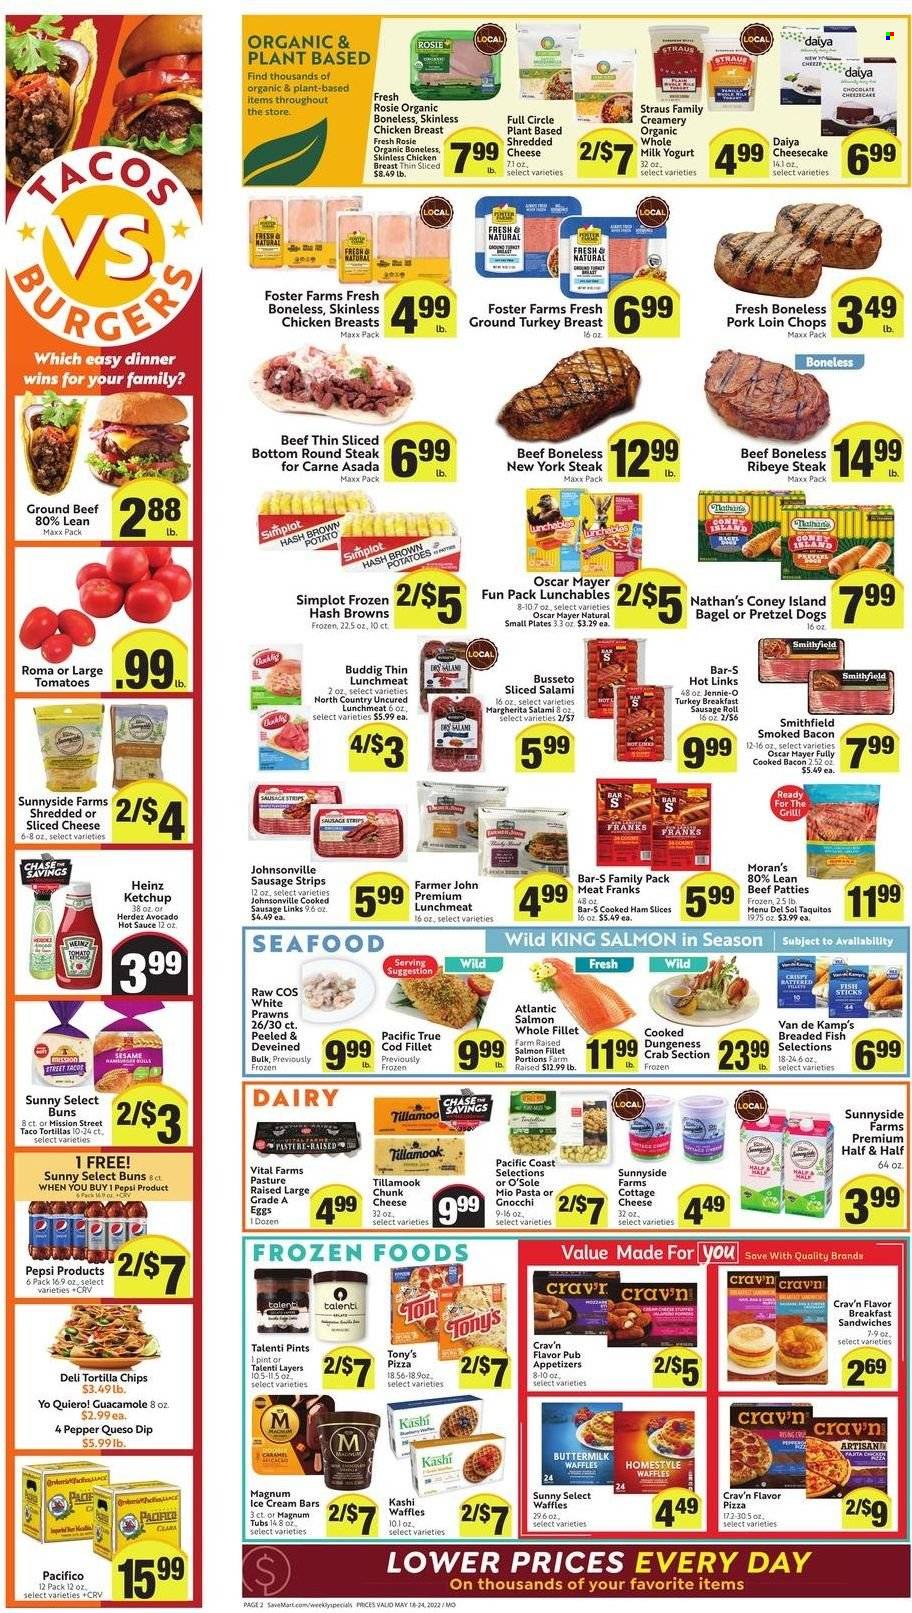 thumbnail - Save Mart Flyer - 05/18/2022 - 05/24/2022 - Sales products - bagels, pretzels, buns, waffles, ground turkey, turkey breast, beef meat, beef steak, ground beef, steak, round steak, ribeye steak, Johnsonville, pork chops, pork loin, pork meat, cod, salmon, salmon fillet, seafood, prawns, crab, fish, Van de Kamp's, gnocchi, pizza, sauce, breaded fish, Menu Del Sol, taquitos, Lunchables, bacon, cooked ham, salami, ham, Oscar Mayer, sausage, lunch meat, cottage cheese, shredded cheese, sliced cheese, yoghurt, buttermilk, eggs, dip, Magnum, ice cream, ice cream bars, Talenti Gelato, strips, hash browns, tortilla chips, Heinz, guacamole, hot sauce, ketchup, Pepsi, Half and half. Page 2.